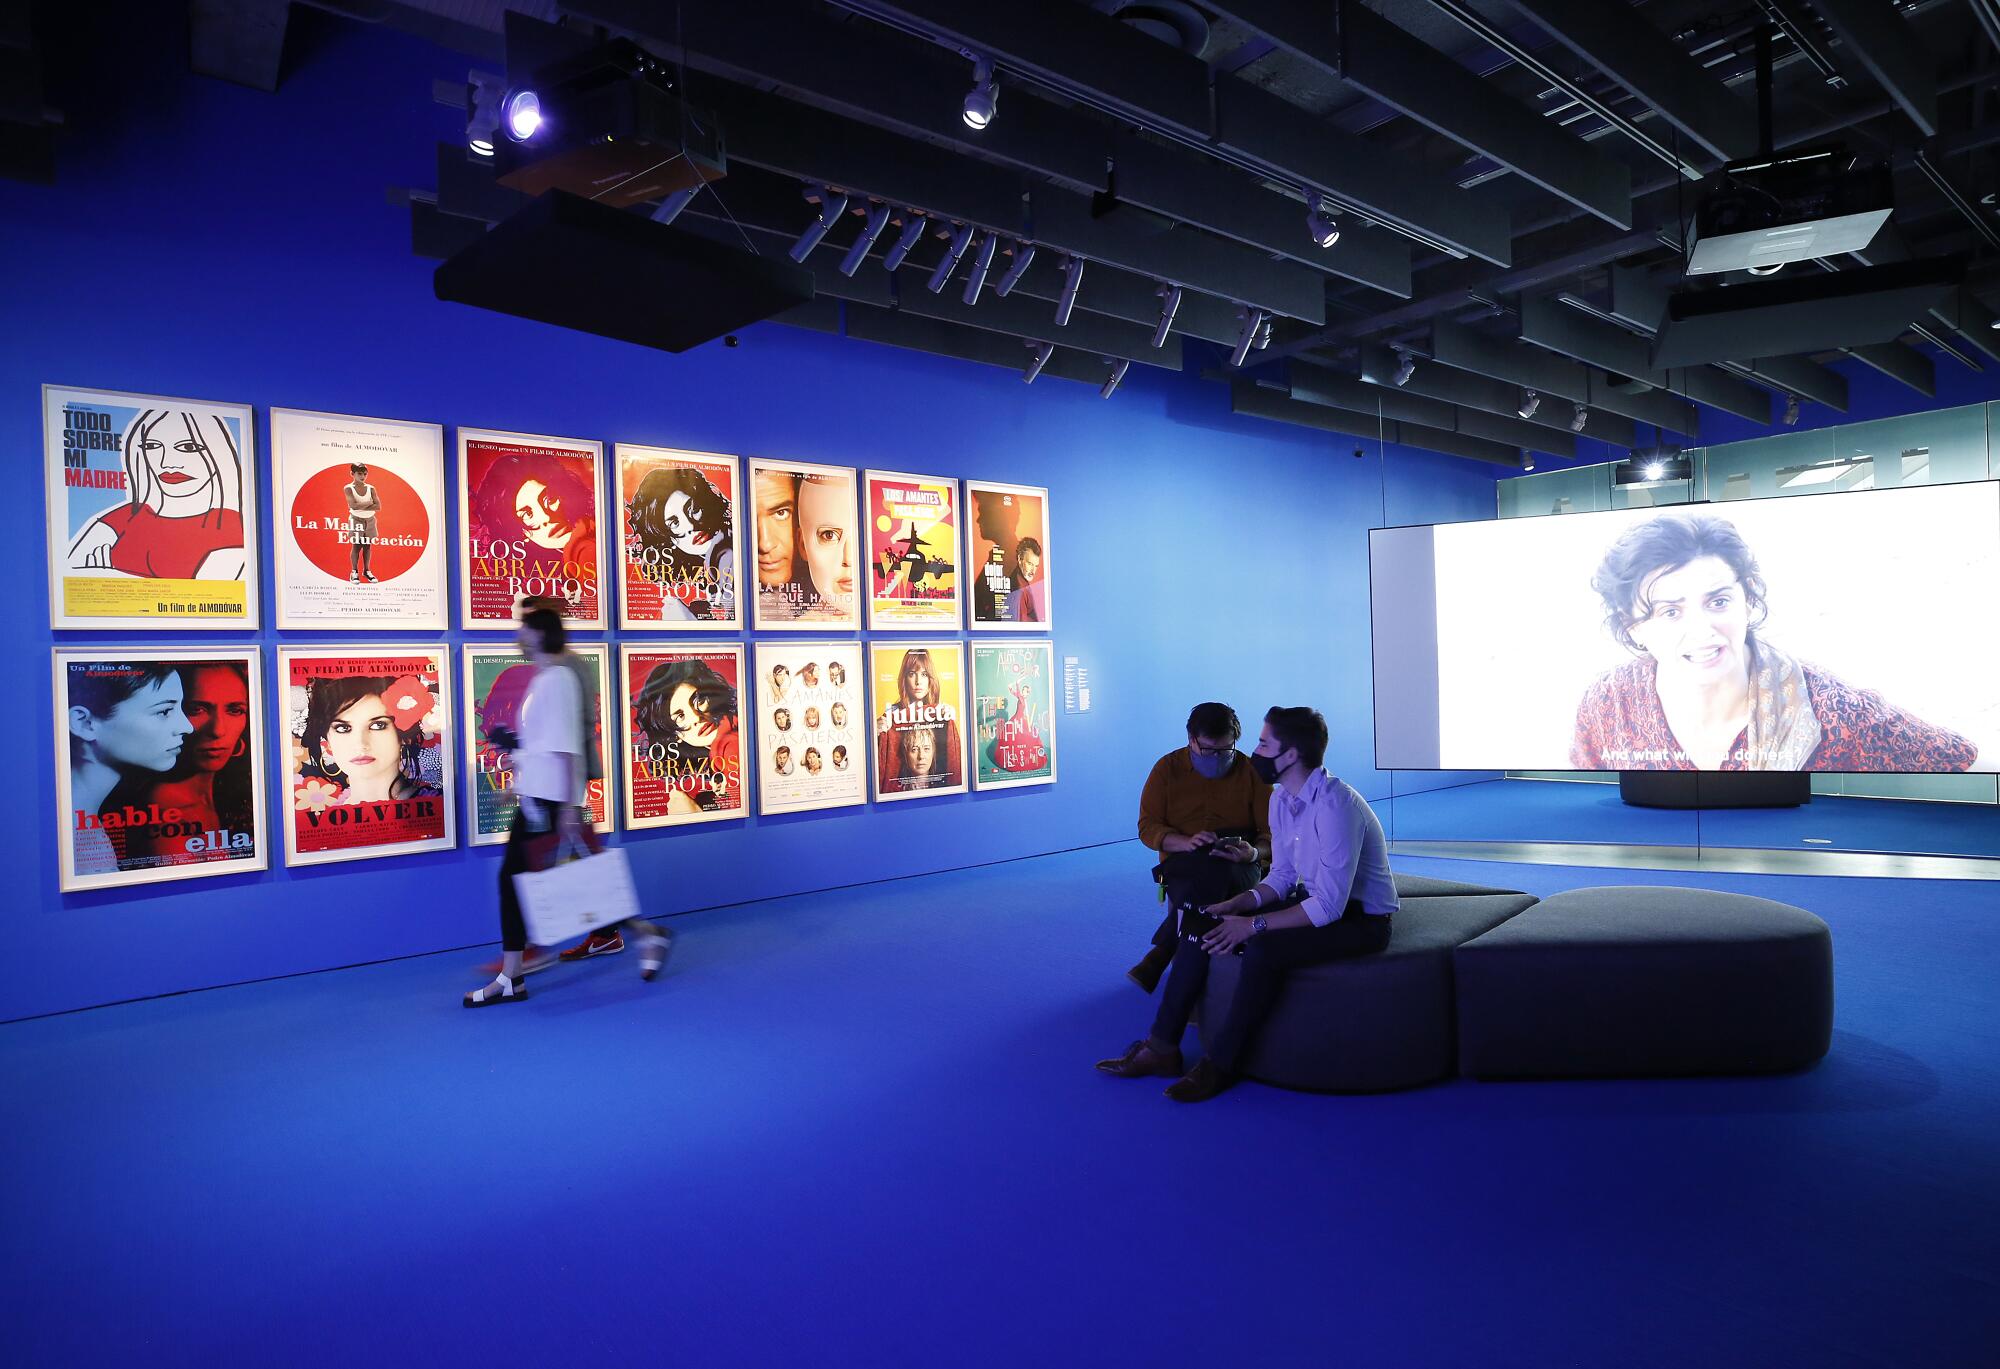 Visitors look at a wall of posters from movies made by Pedro Almodóvar.